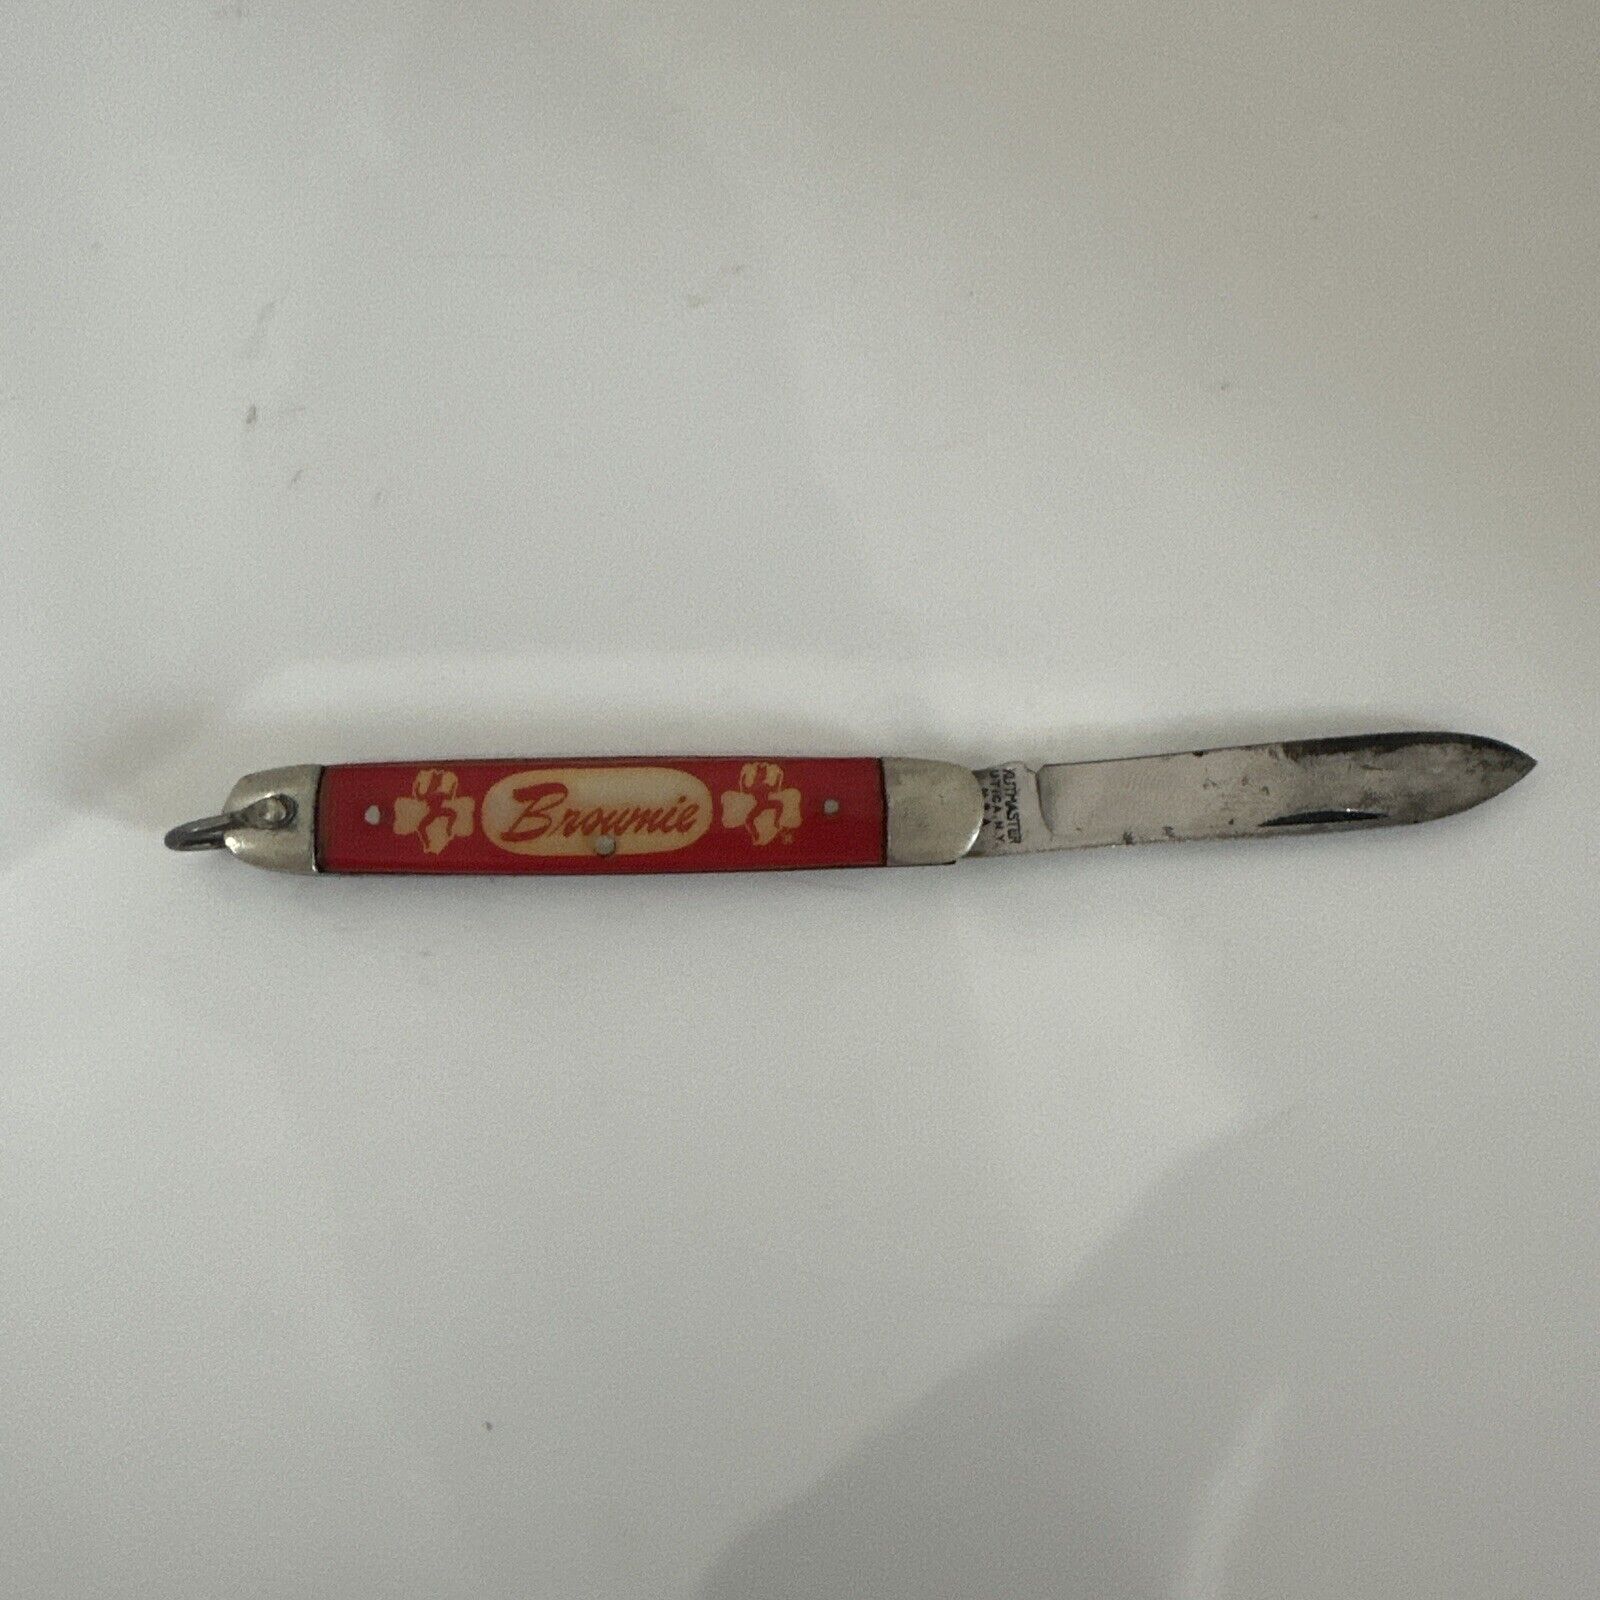 VINTAGE GIRL SCOUT KNIFE - BROWNIE UTICA KUTMASTER Be Wise Beware Use With Care